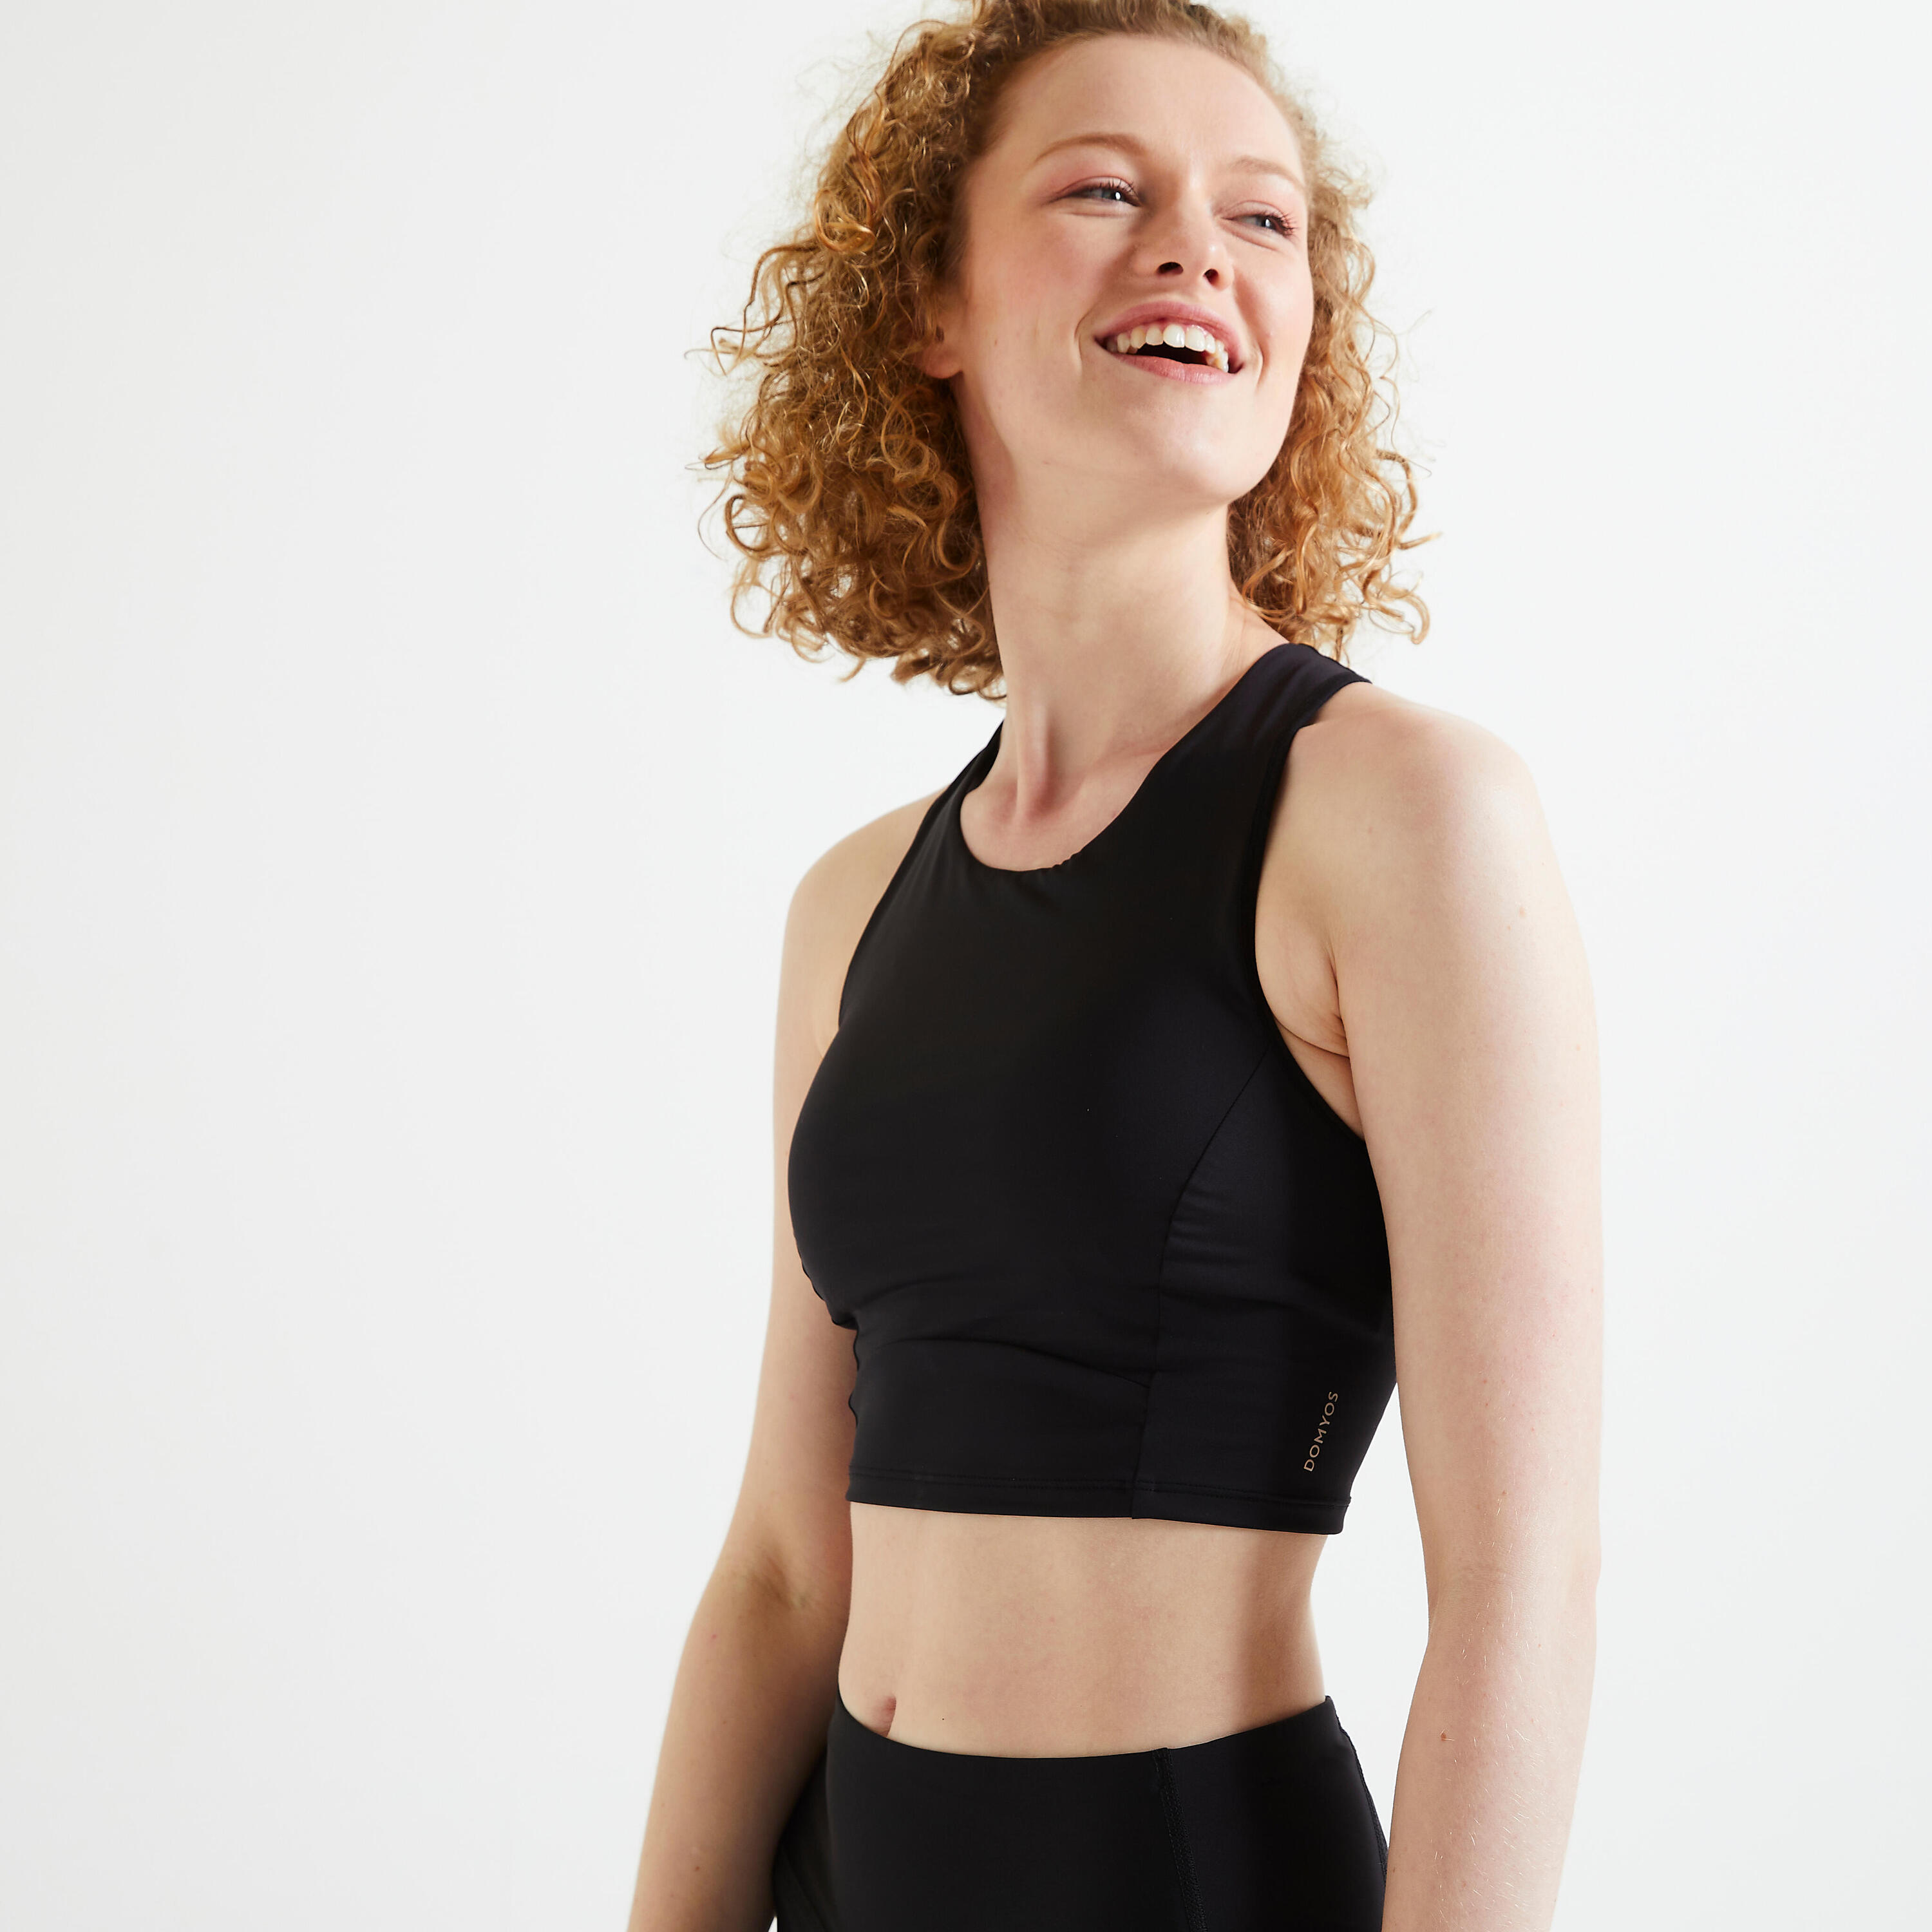 Refurbished Moderate Support Cropped Fitness Sports Bra 540 - A Grade 1/7